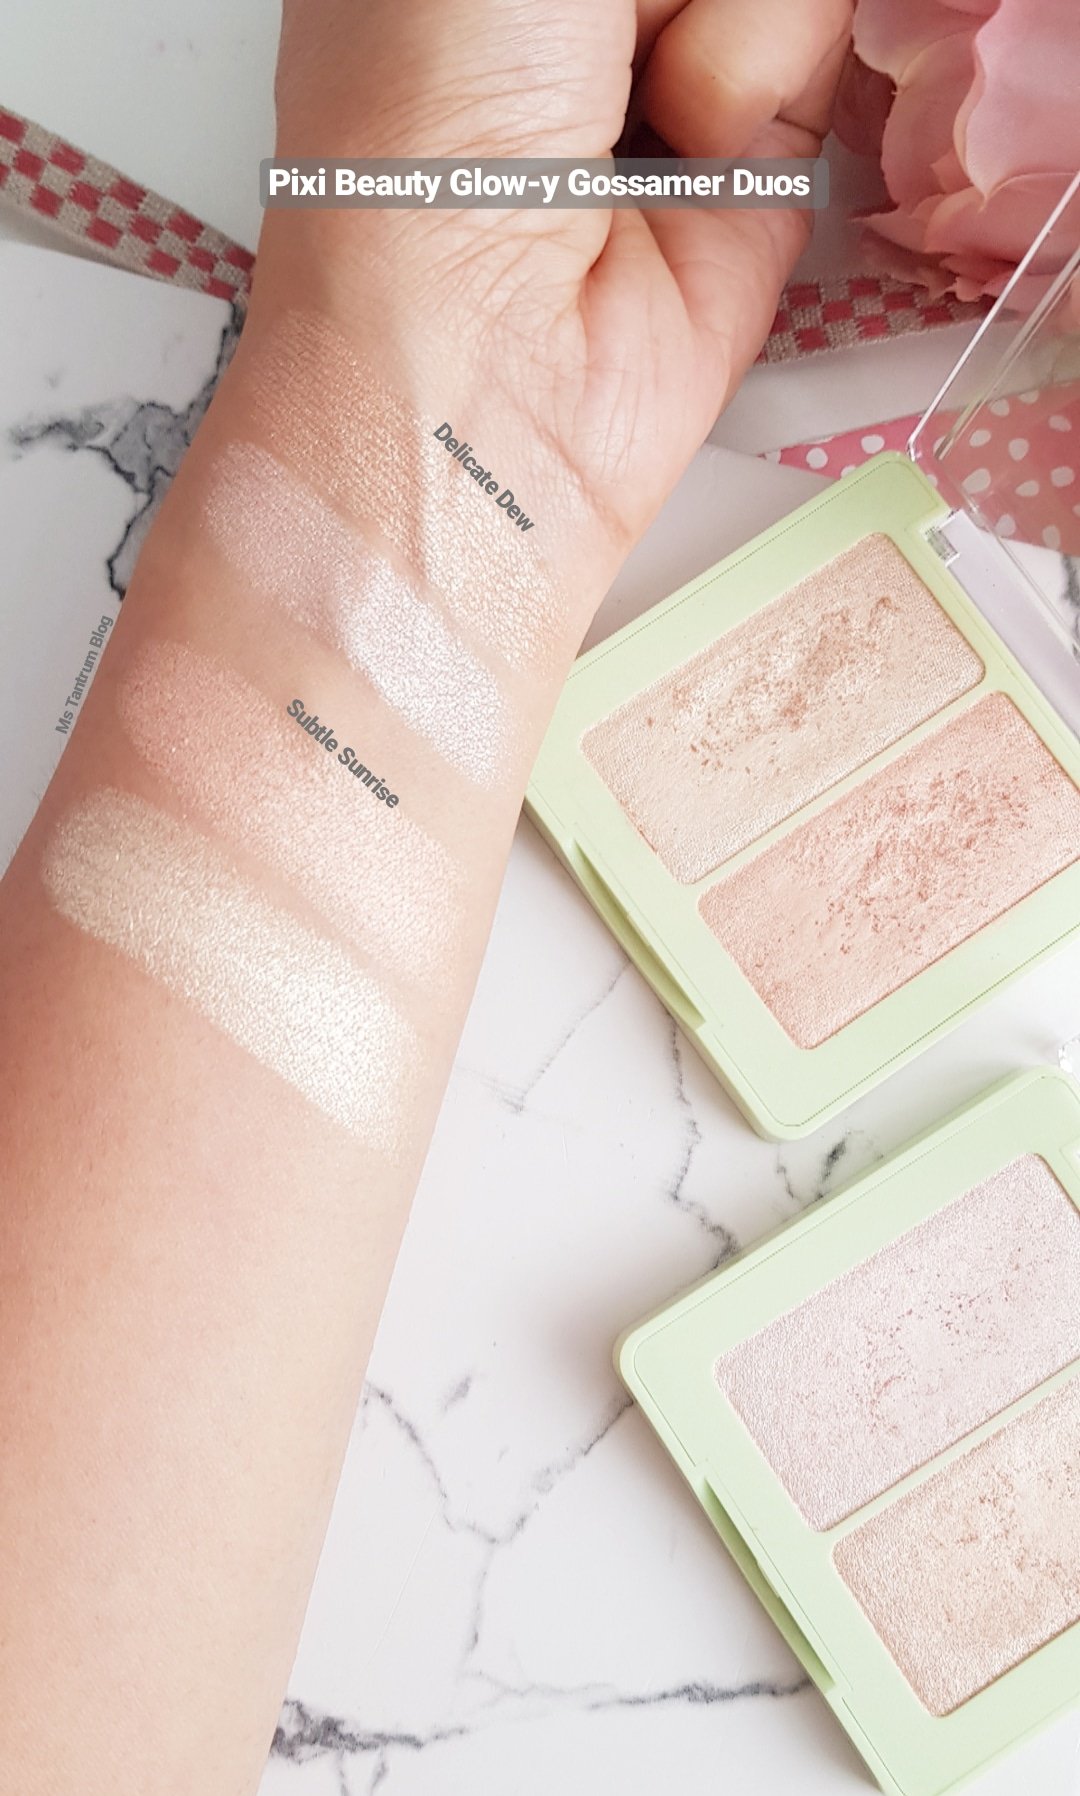 Pixi Beauty Glow in a Box - Glow-y Gossamer Duo highlighters Swatches - Ms Tantrum Blog